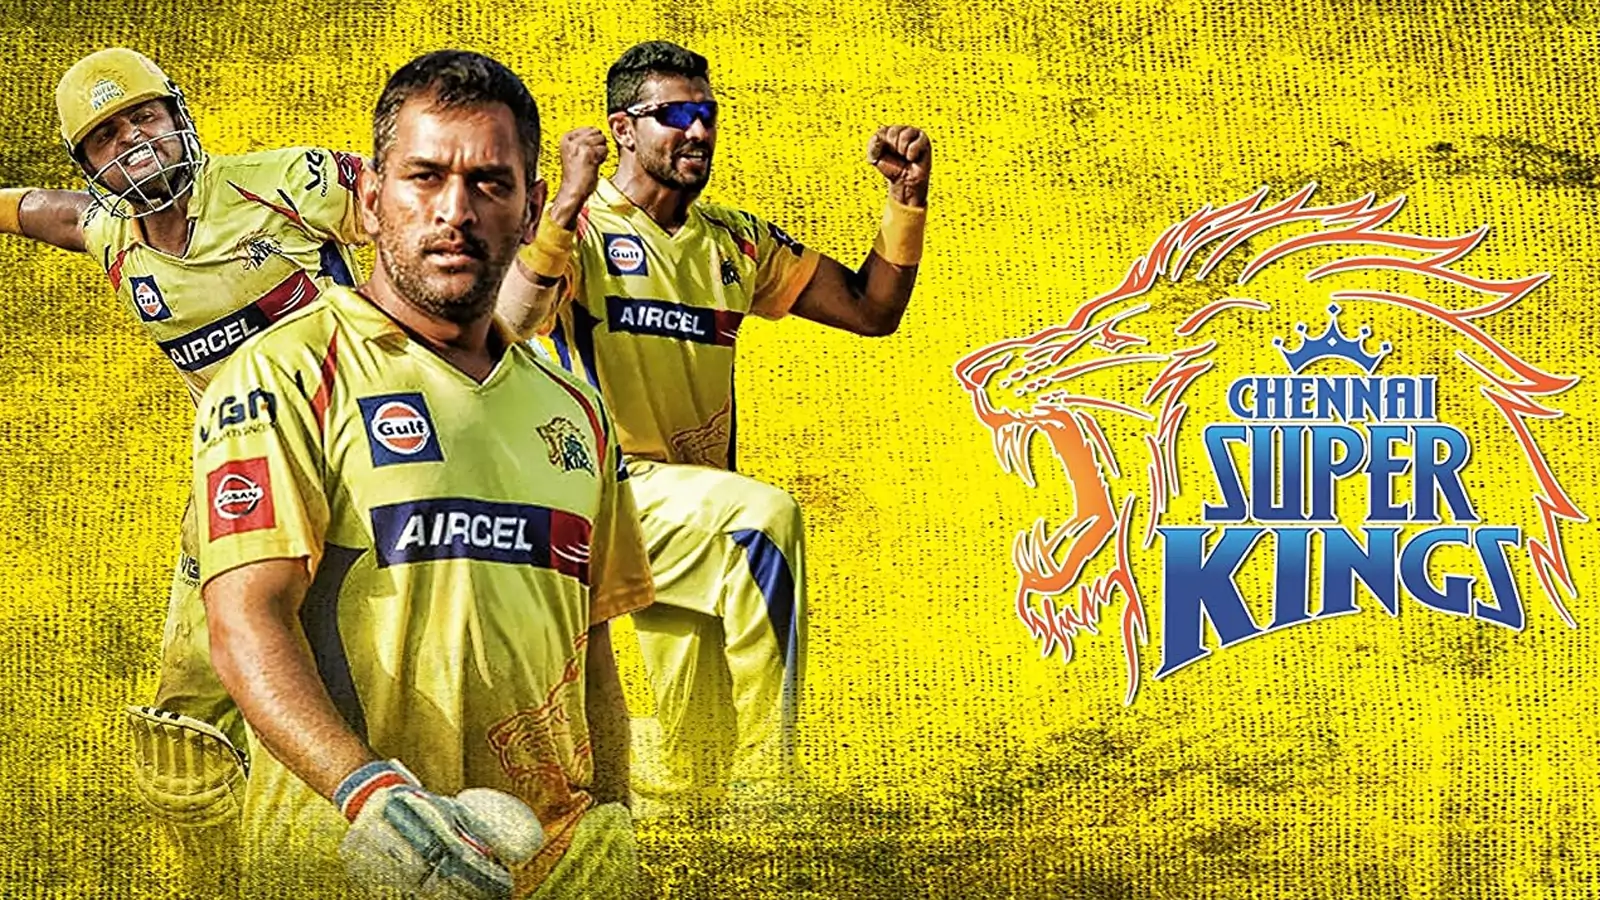 Place a bet on Chennai Super Kings during the IPL events.